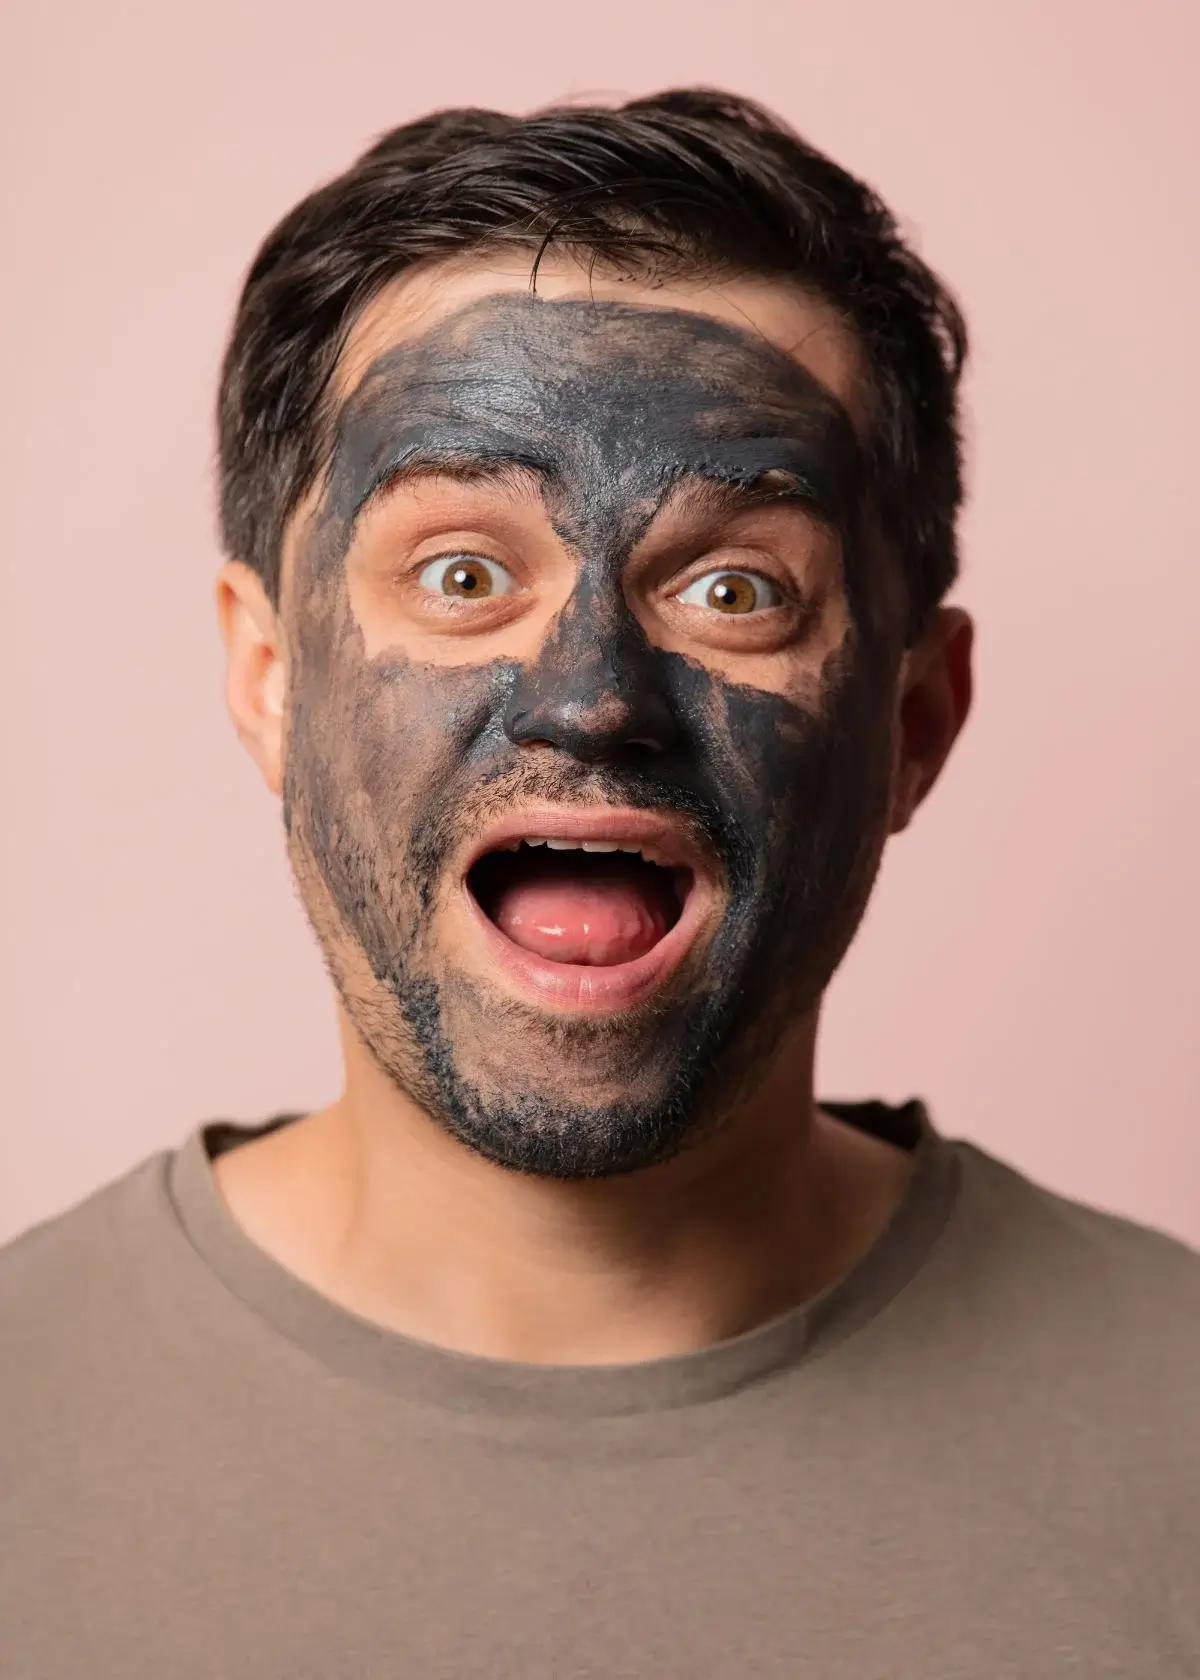 What types of face masks are suitable for men?